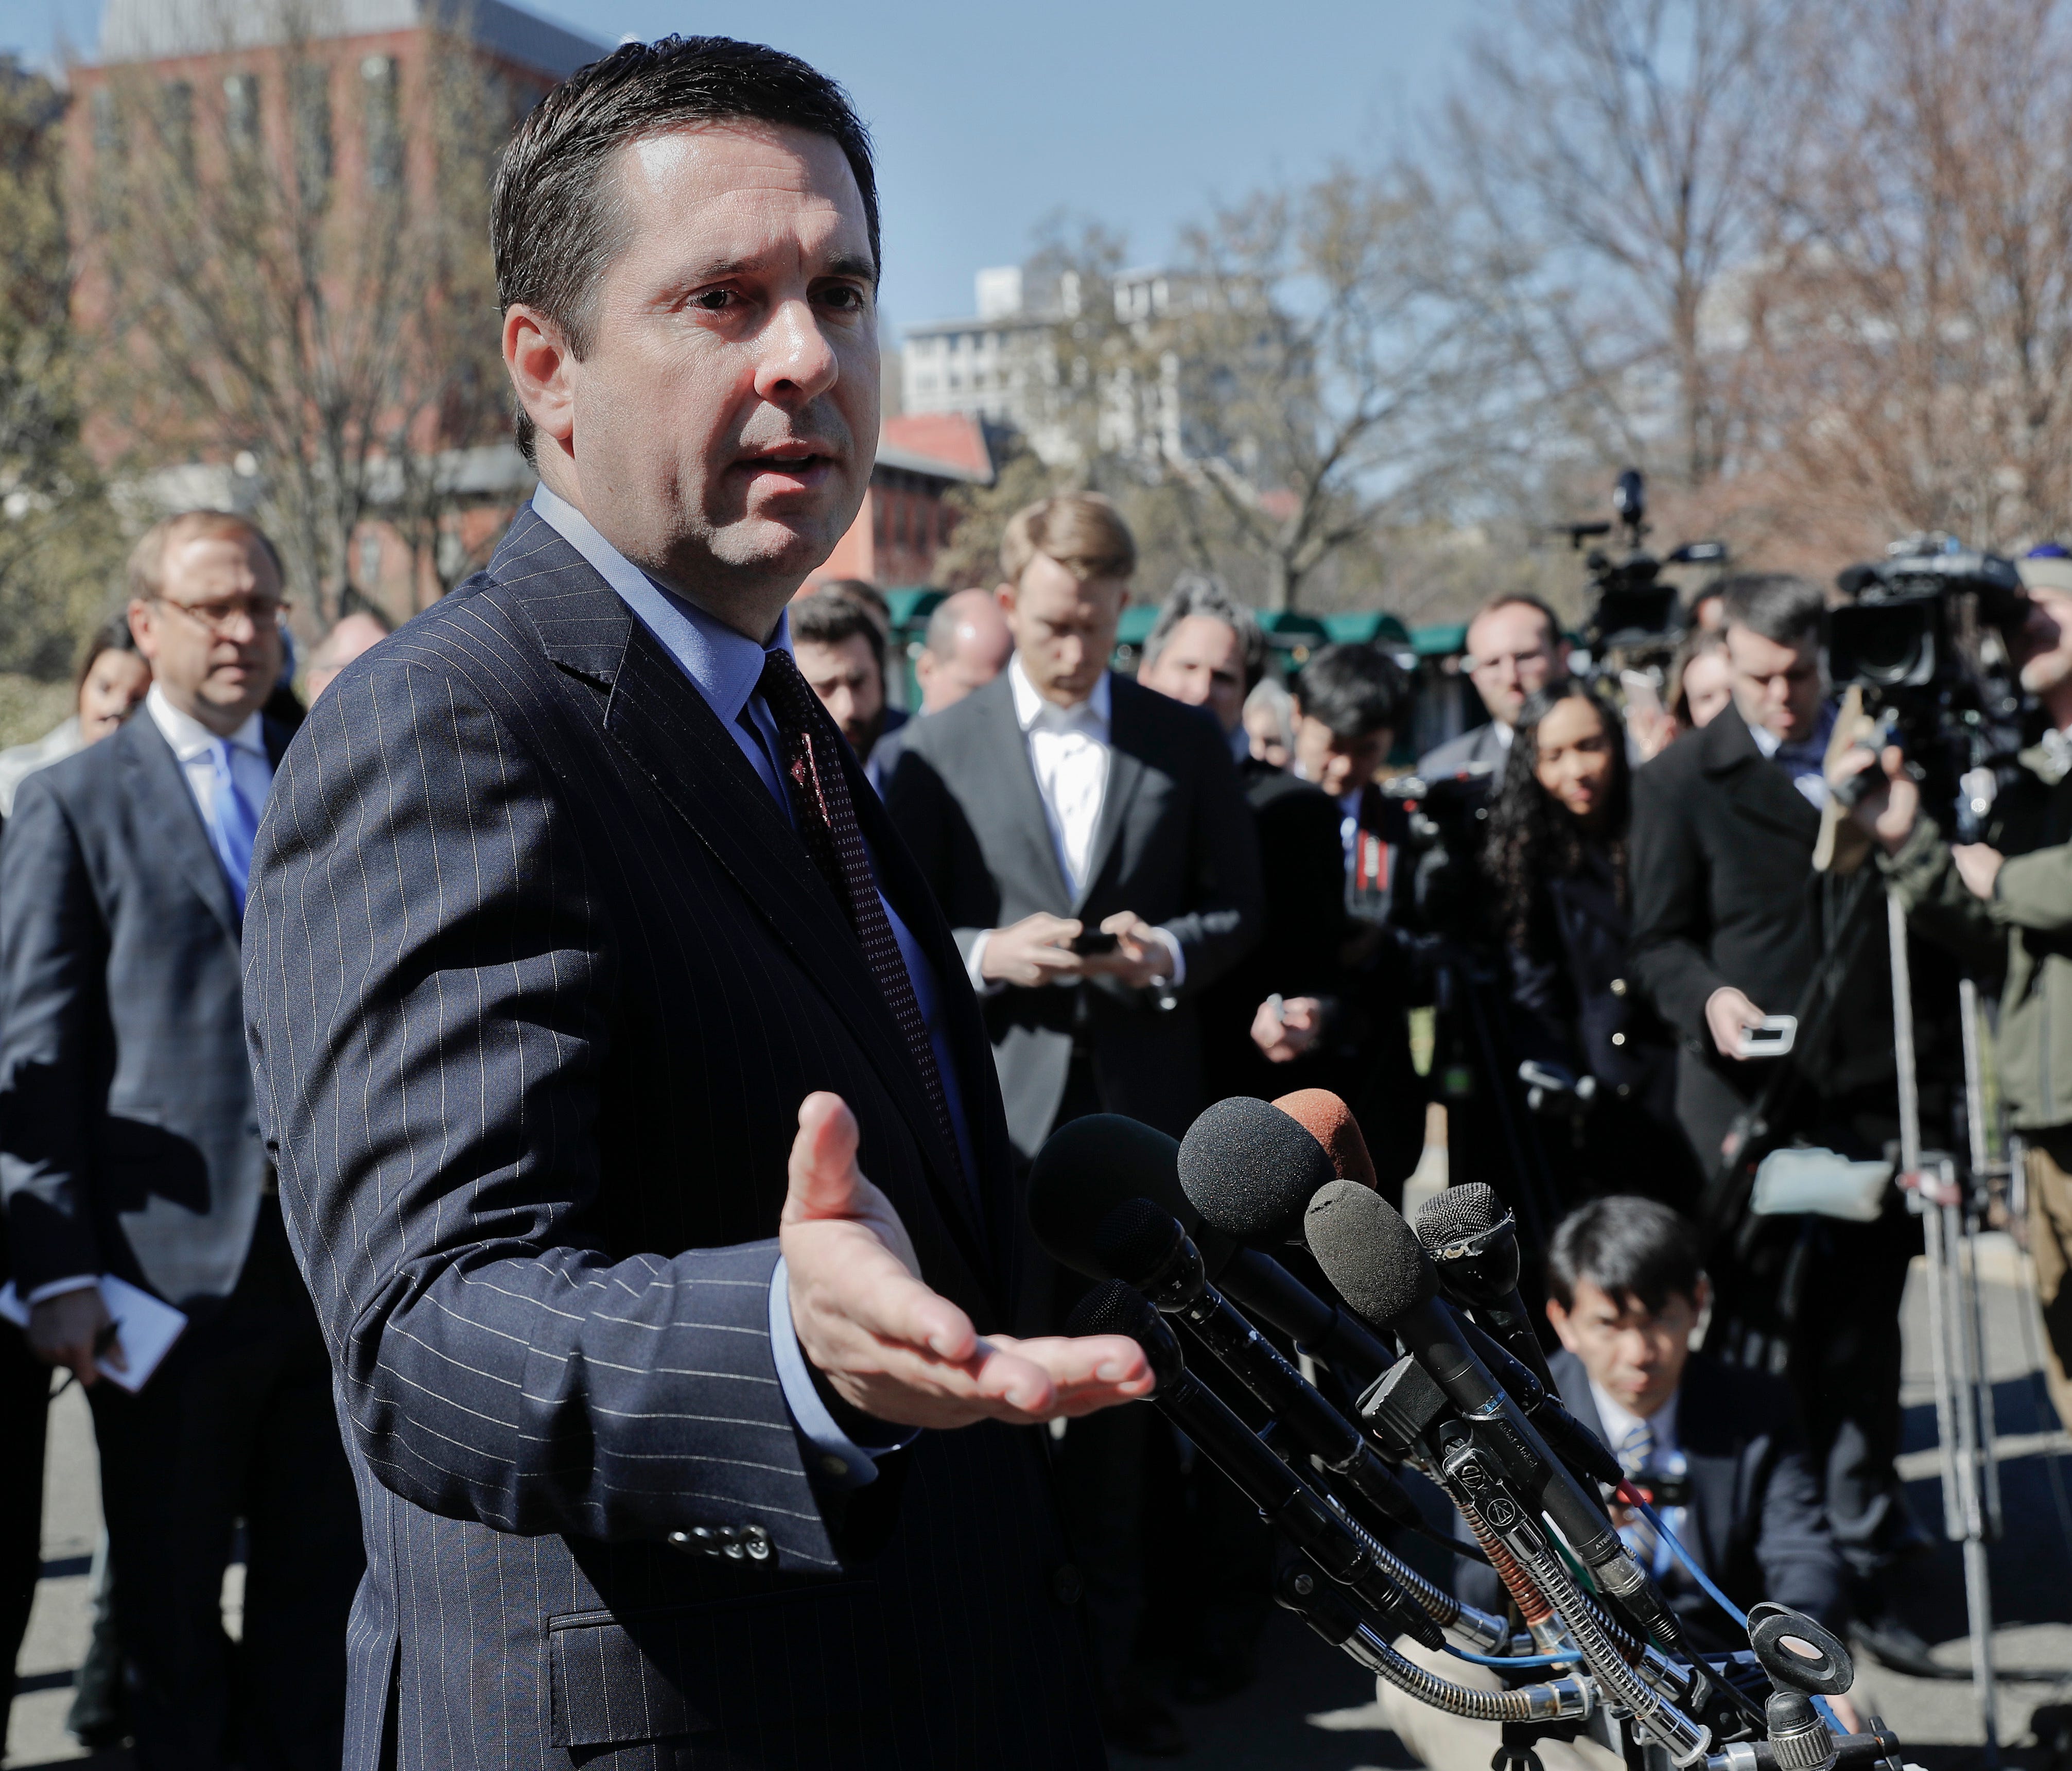 House Intelligence Committee Chairman Rep. Devin Nunes, R-Calif, speaks with reporters outside the White House in Washington, March 22, 2017, following a meeting with President Donald Trump.